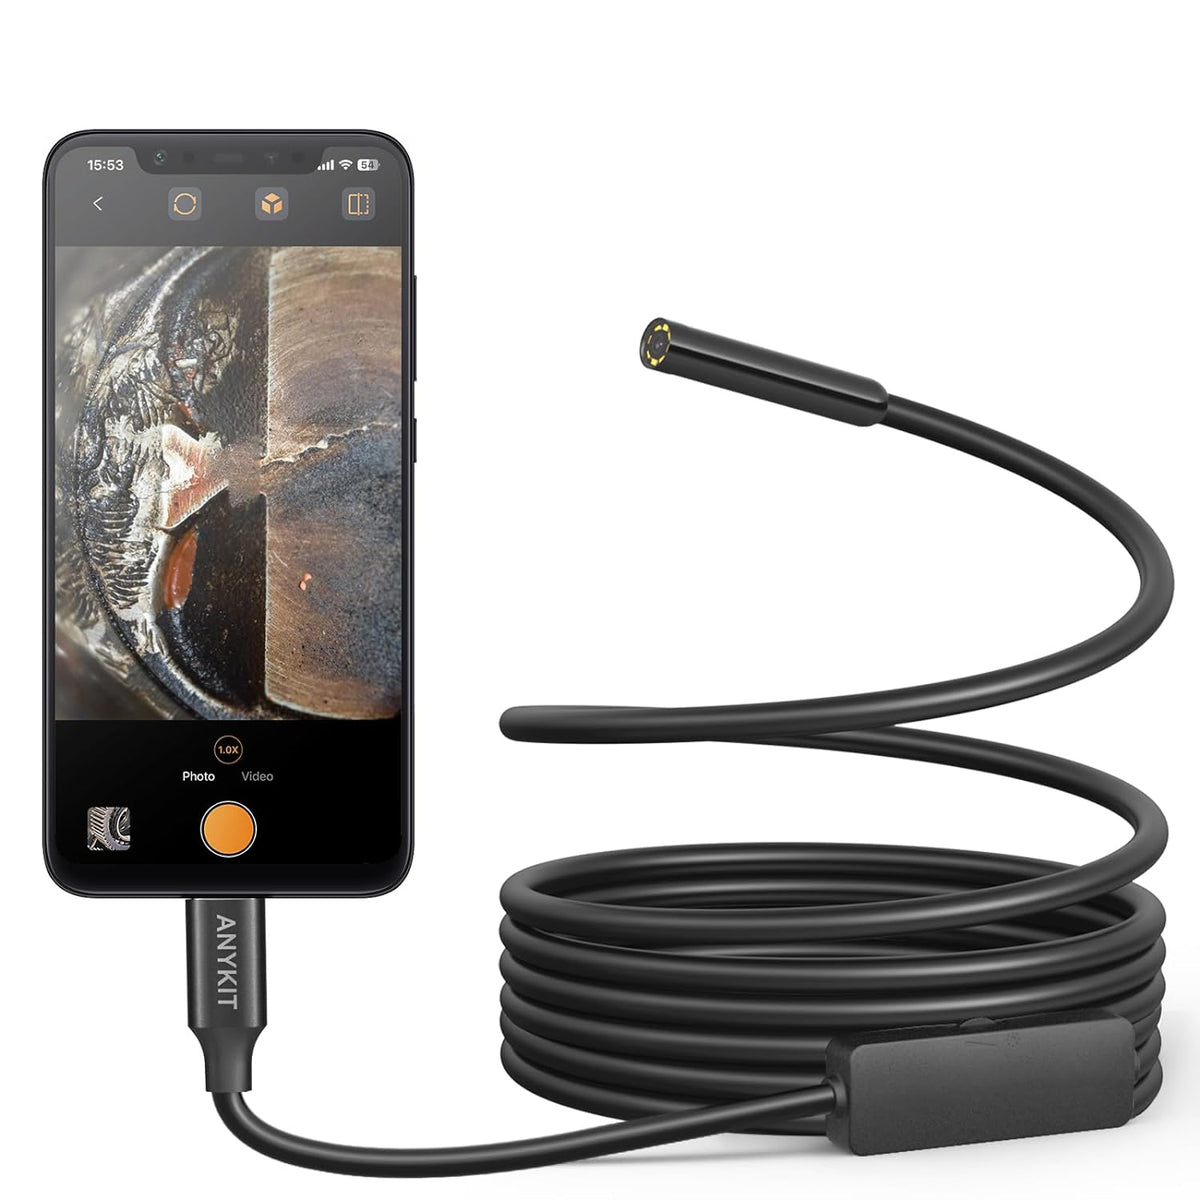 Endoscope Camera with Light, 1080P 1.0MP Borescope with 8 LED Lights, USB Endoscope with Semi-Rigid Snake Camera, IP67 Waterproof Inspection Camera for iPhone, iPad, OTG Android Phone